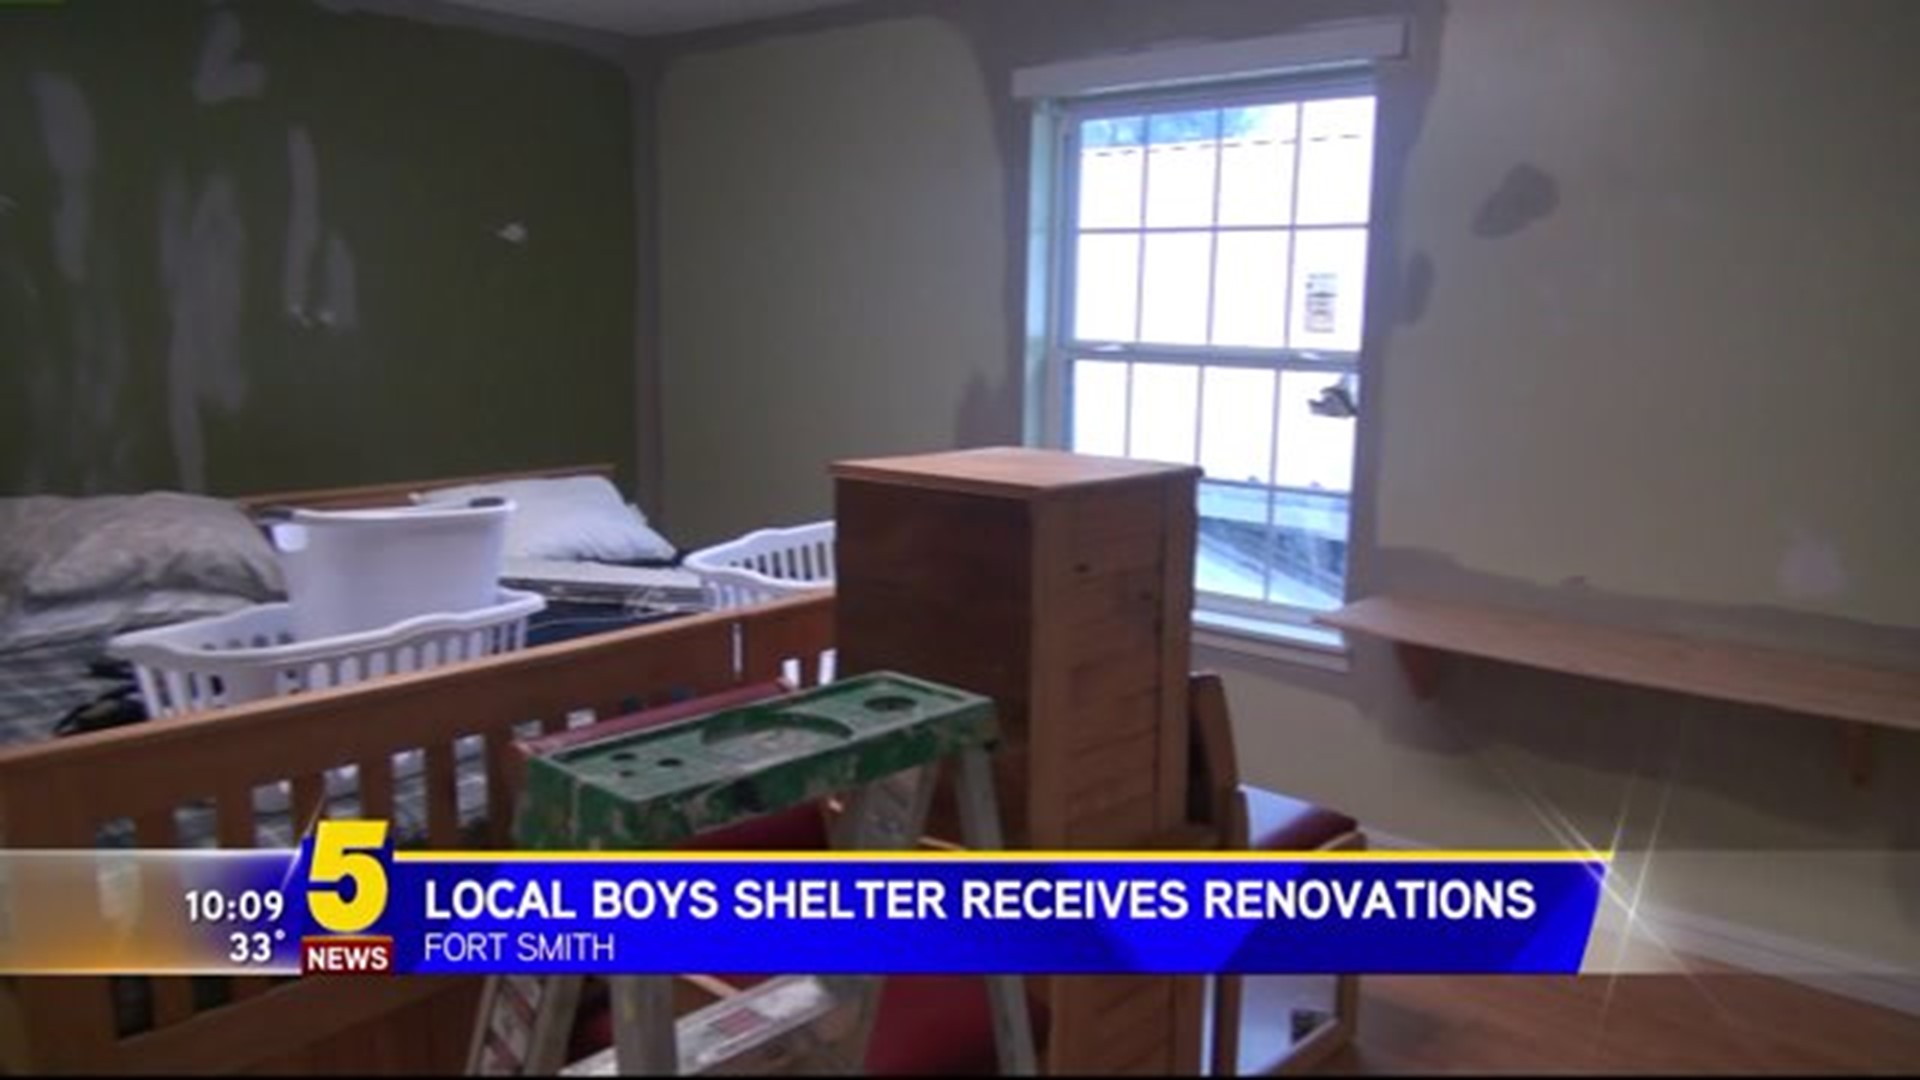 Local Boys Shelter Receives Renovations